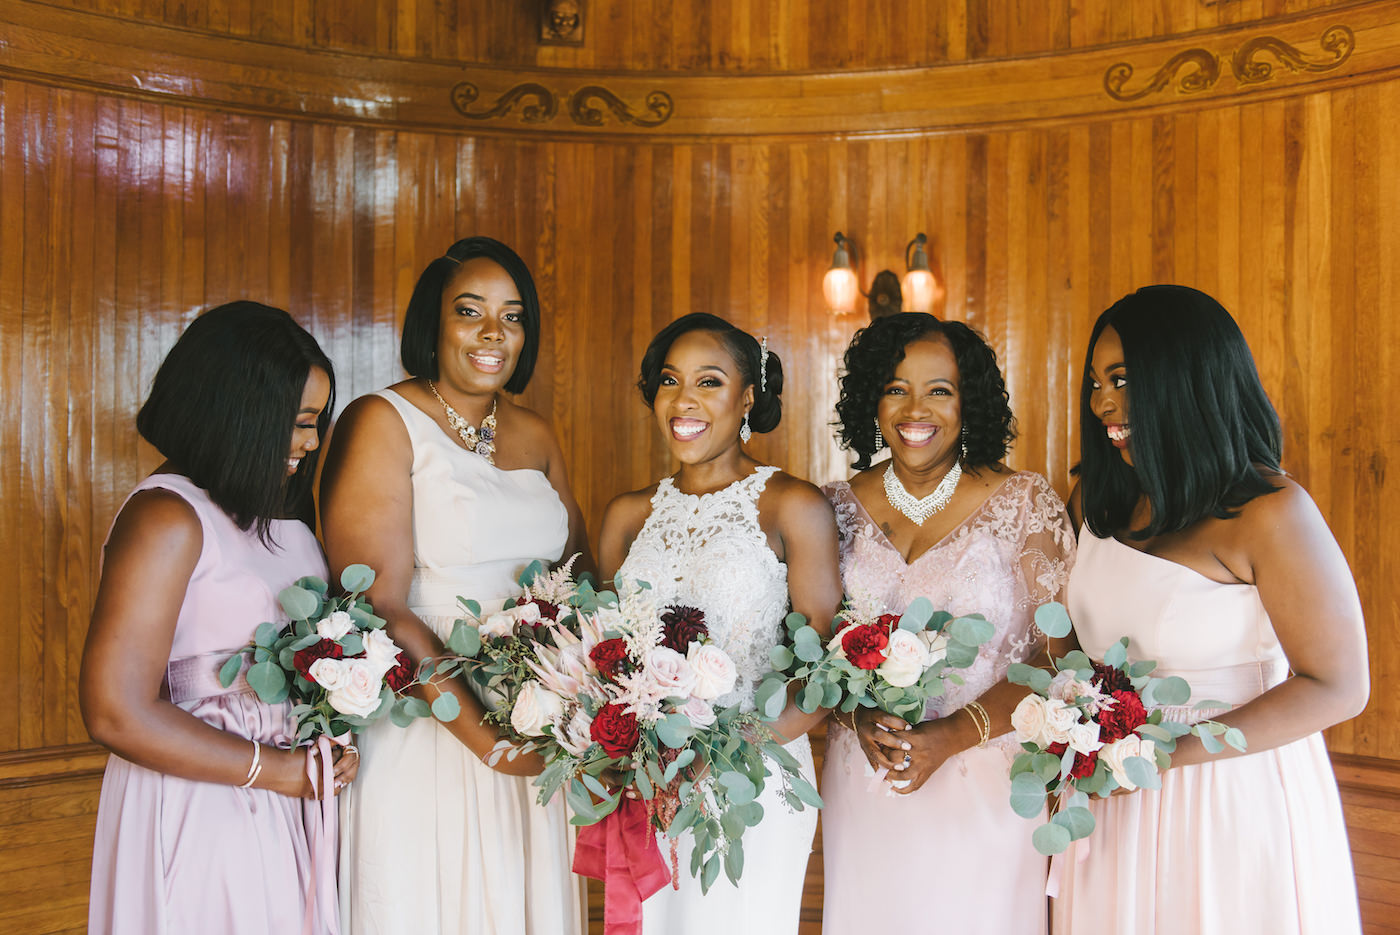 Romantic Florida Bridal Party, Bridesmaids Wearing Mix and Match Pink Color Palette, Holding Luxurious Bridal Bouquet with King Protea, Roses and Eucalyptus Leafs, Bride Wearing Form Fitting Lace Wedding Dress, Holding Red, Pink, Ivory and White Floral Bouquet with Burgundy Ribbon, Inside Historic Powel Crosley Estate in Sarasota | Florida Wedding Photographer Kera Photography